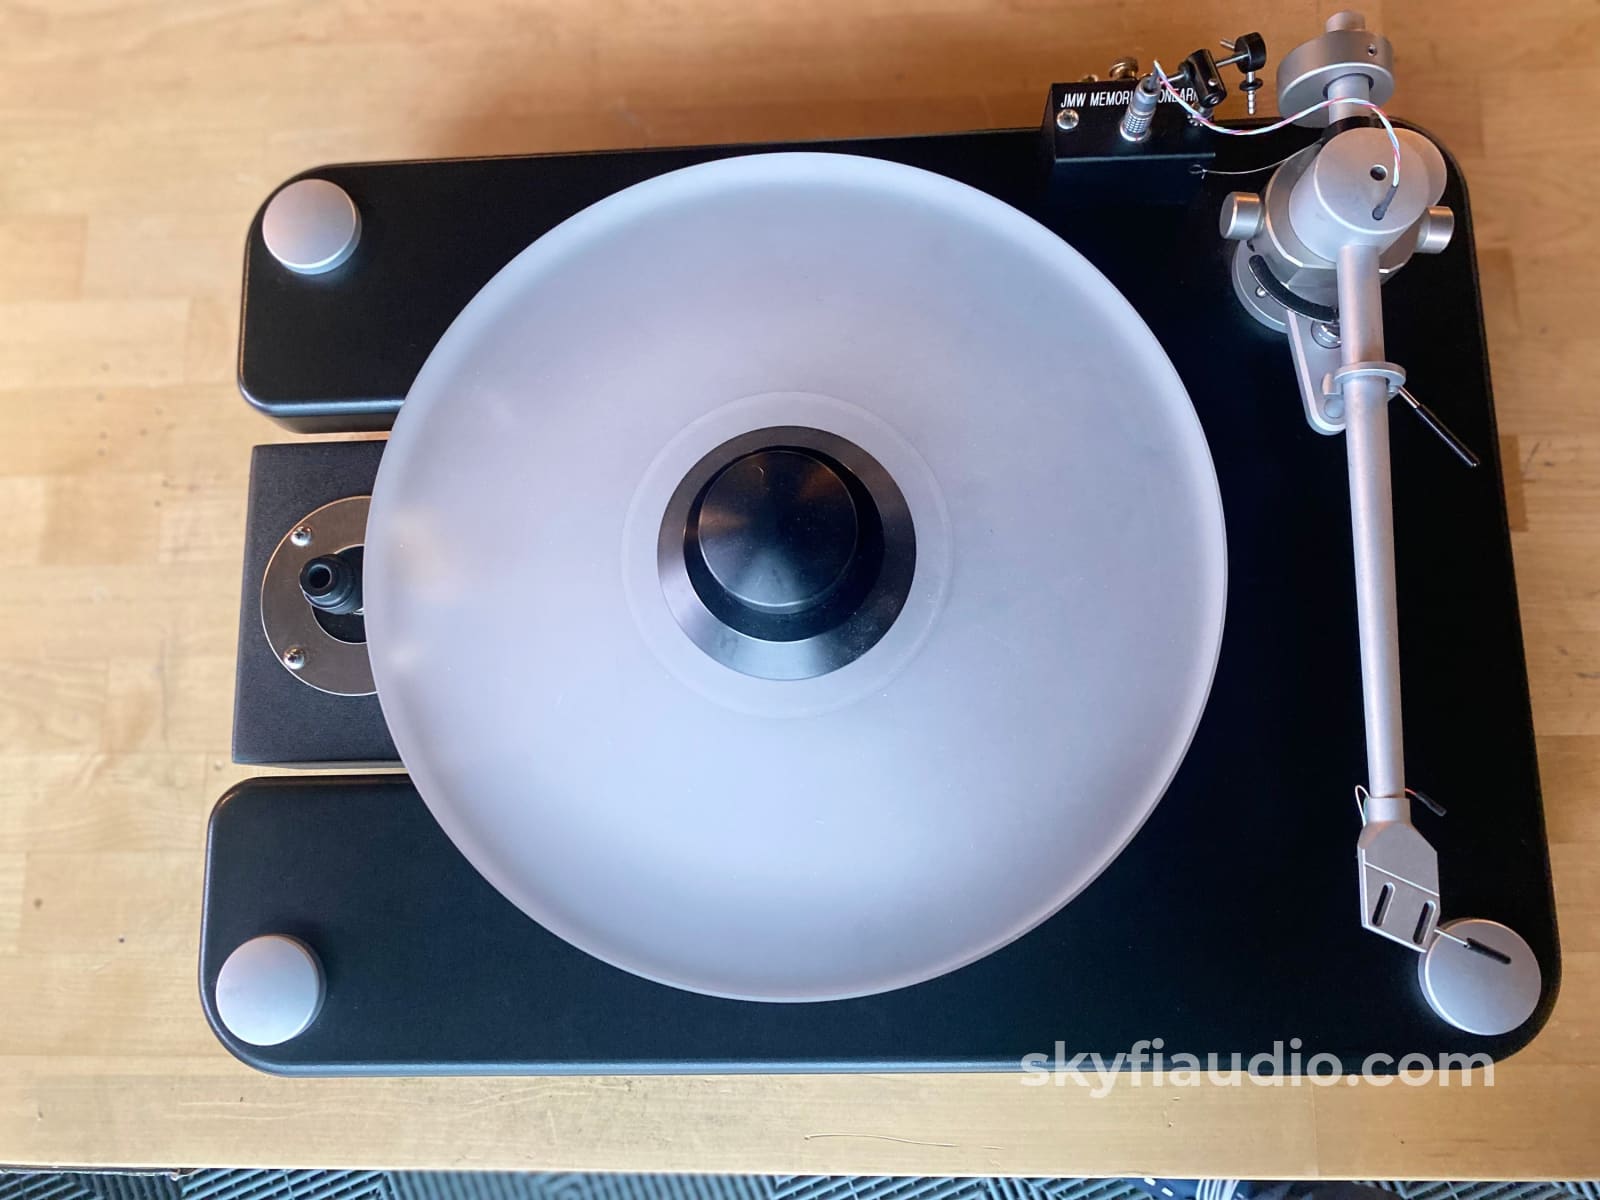 Vpi Scout Turntable W/New Best Selling Sumiko Moving-Coil Phono Cartridge